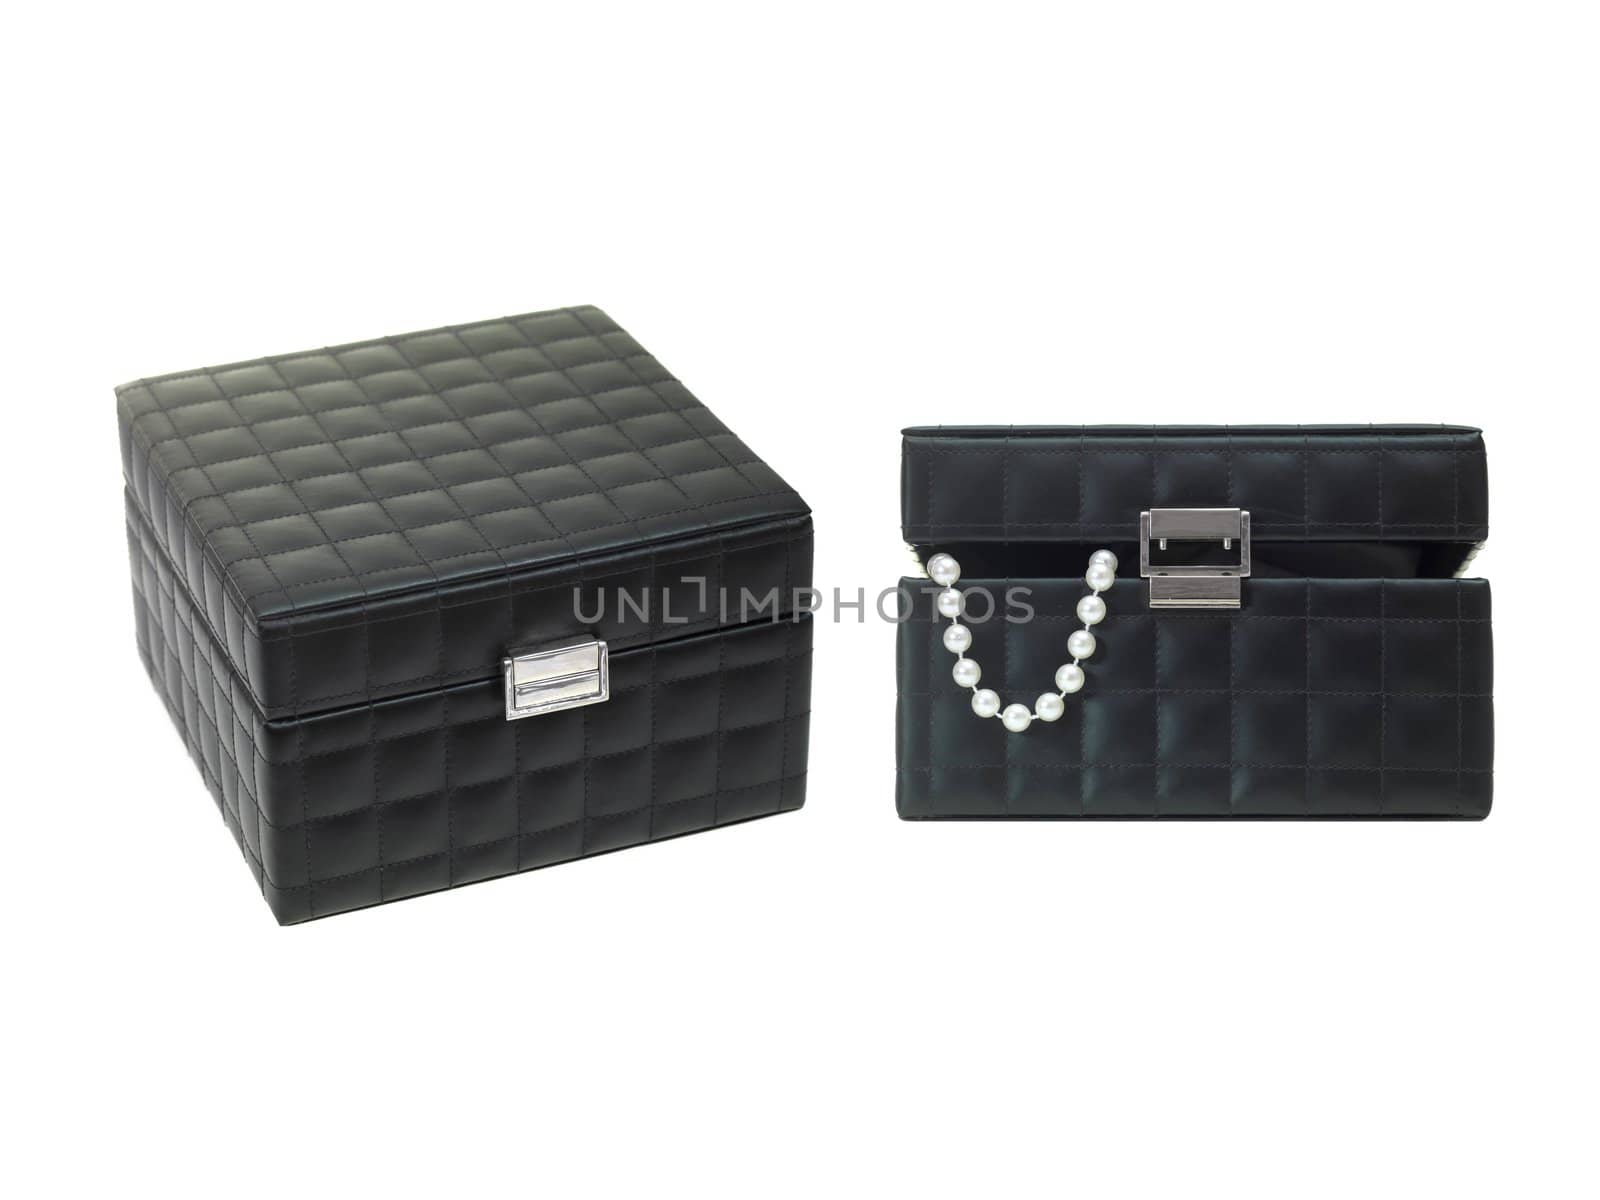 A jewellery box isolated against a white background